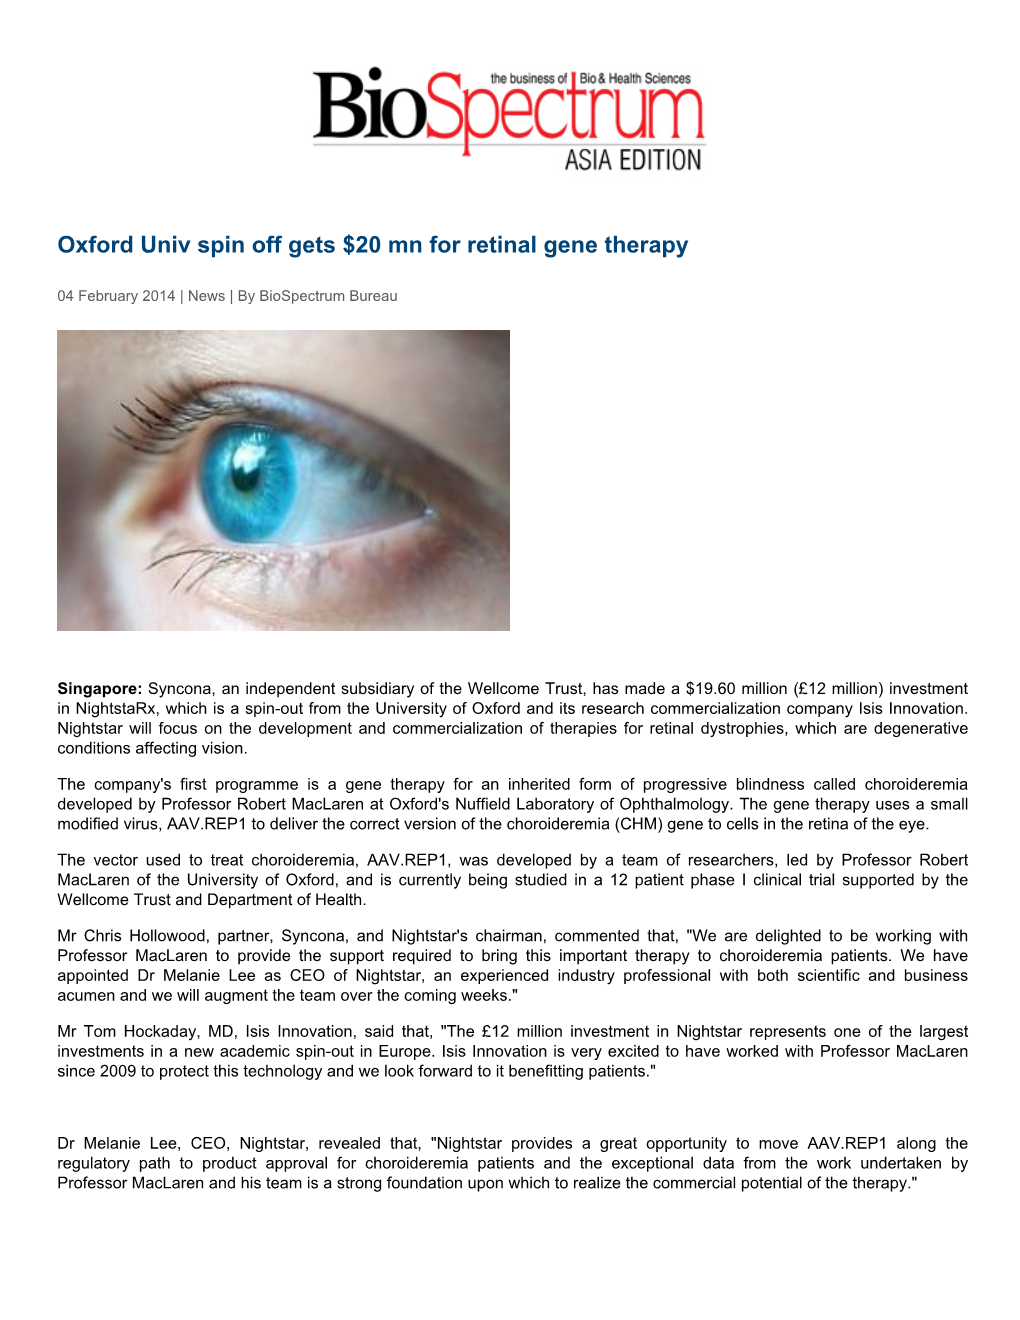 Oxford Univ Spin Off Gets $20 Mn for Retinal Gene Therapy